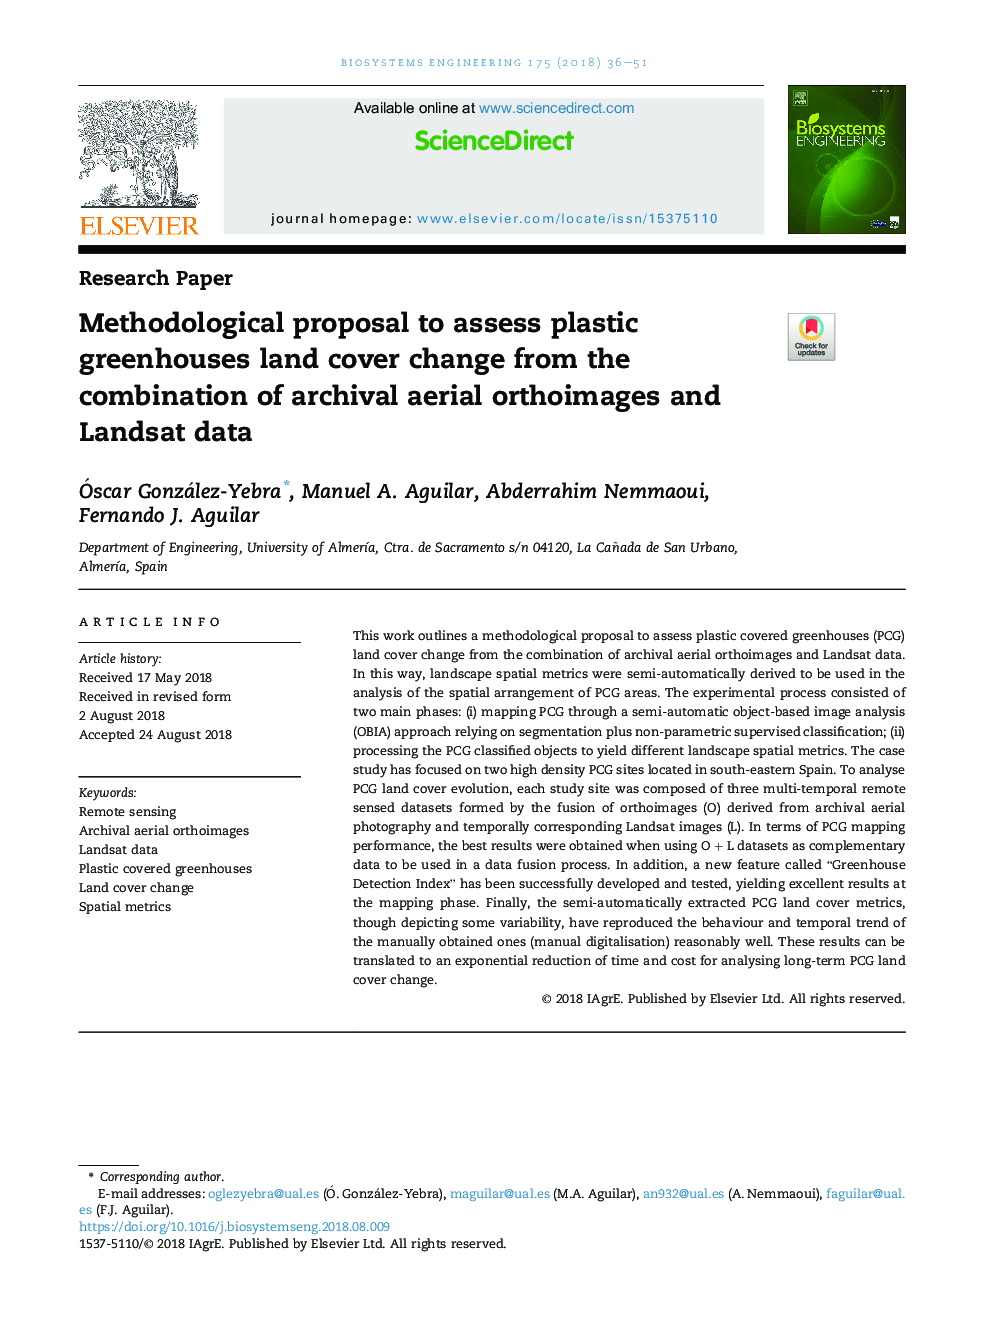 Methodological proposal to assess plastic greenhouses land cover change from the combination of archival aerial orthoimages and Landsat data